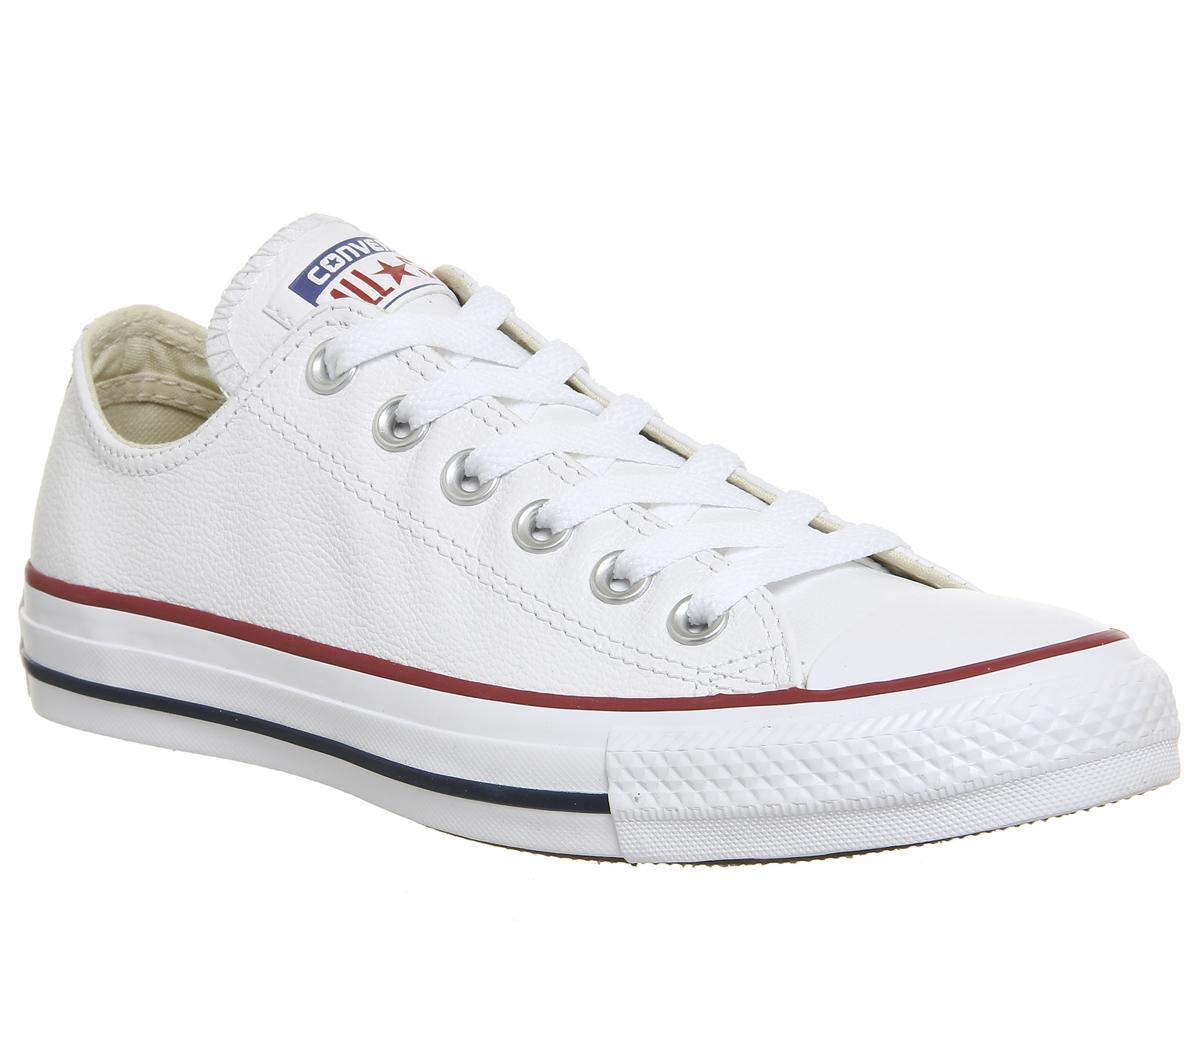 converse all star leather ox optical white